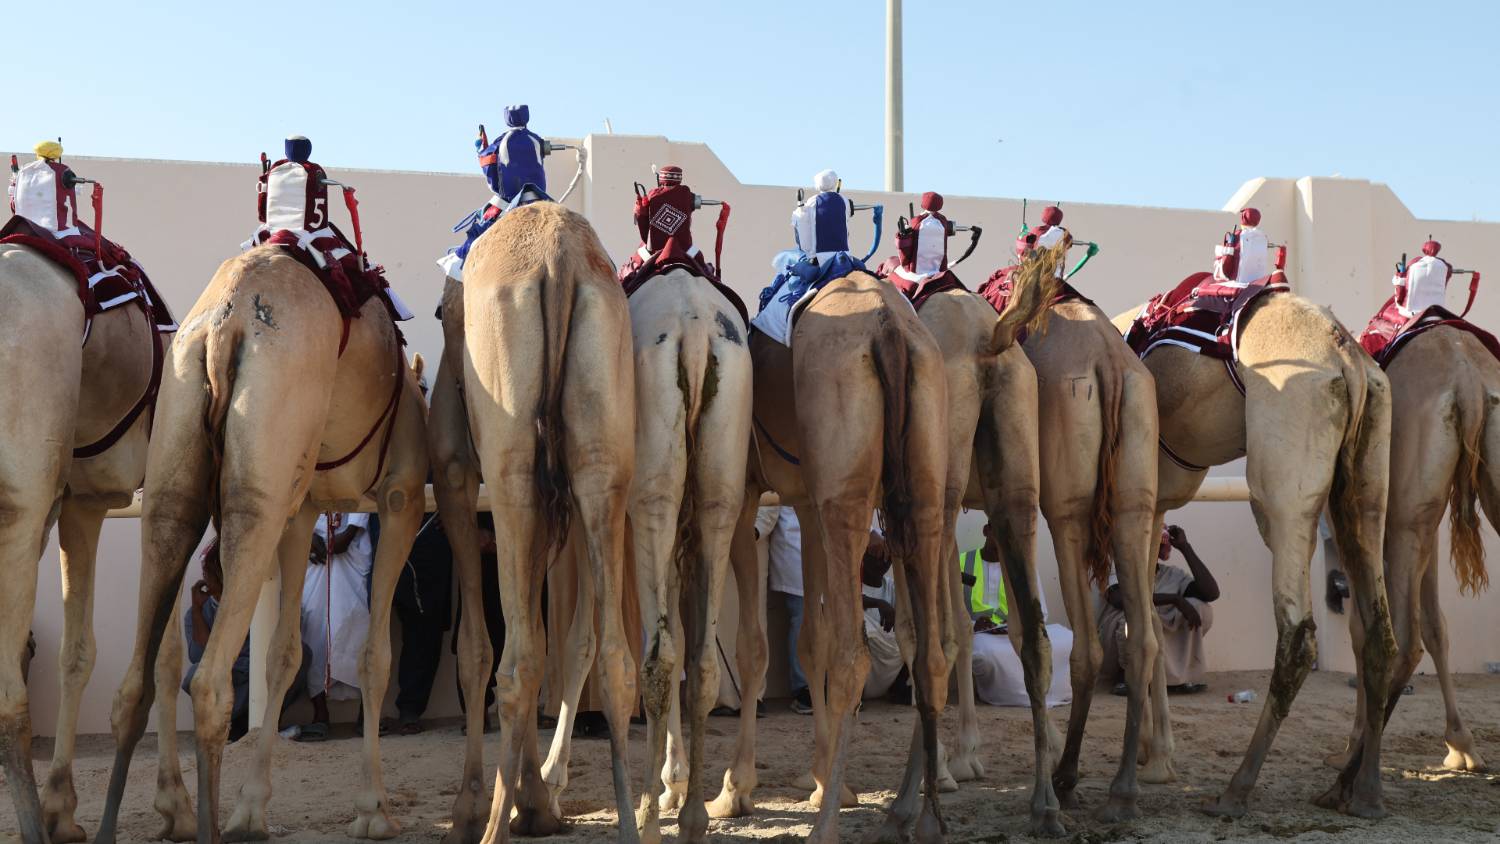 Professional camel racing began in Qatar in the 70s, but more recently child jockeys were replaced with robots (AFP/Karim Jaafar)